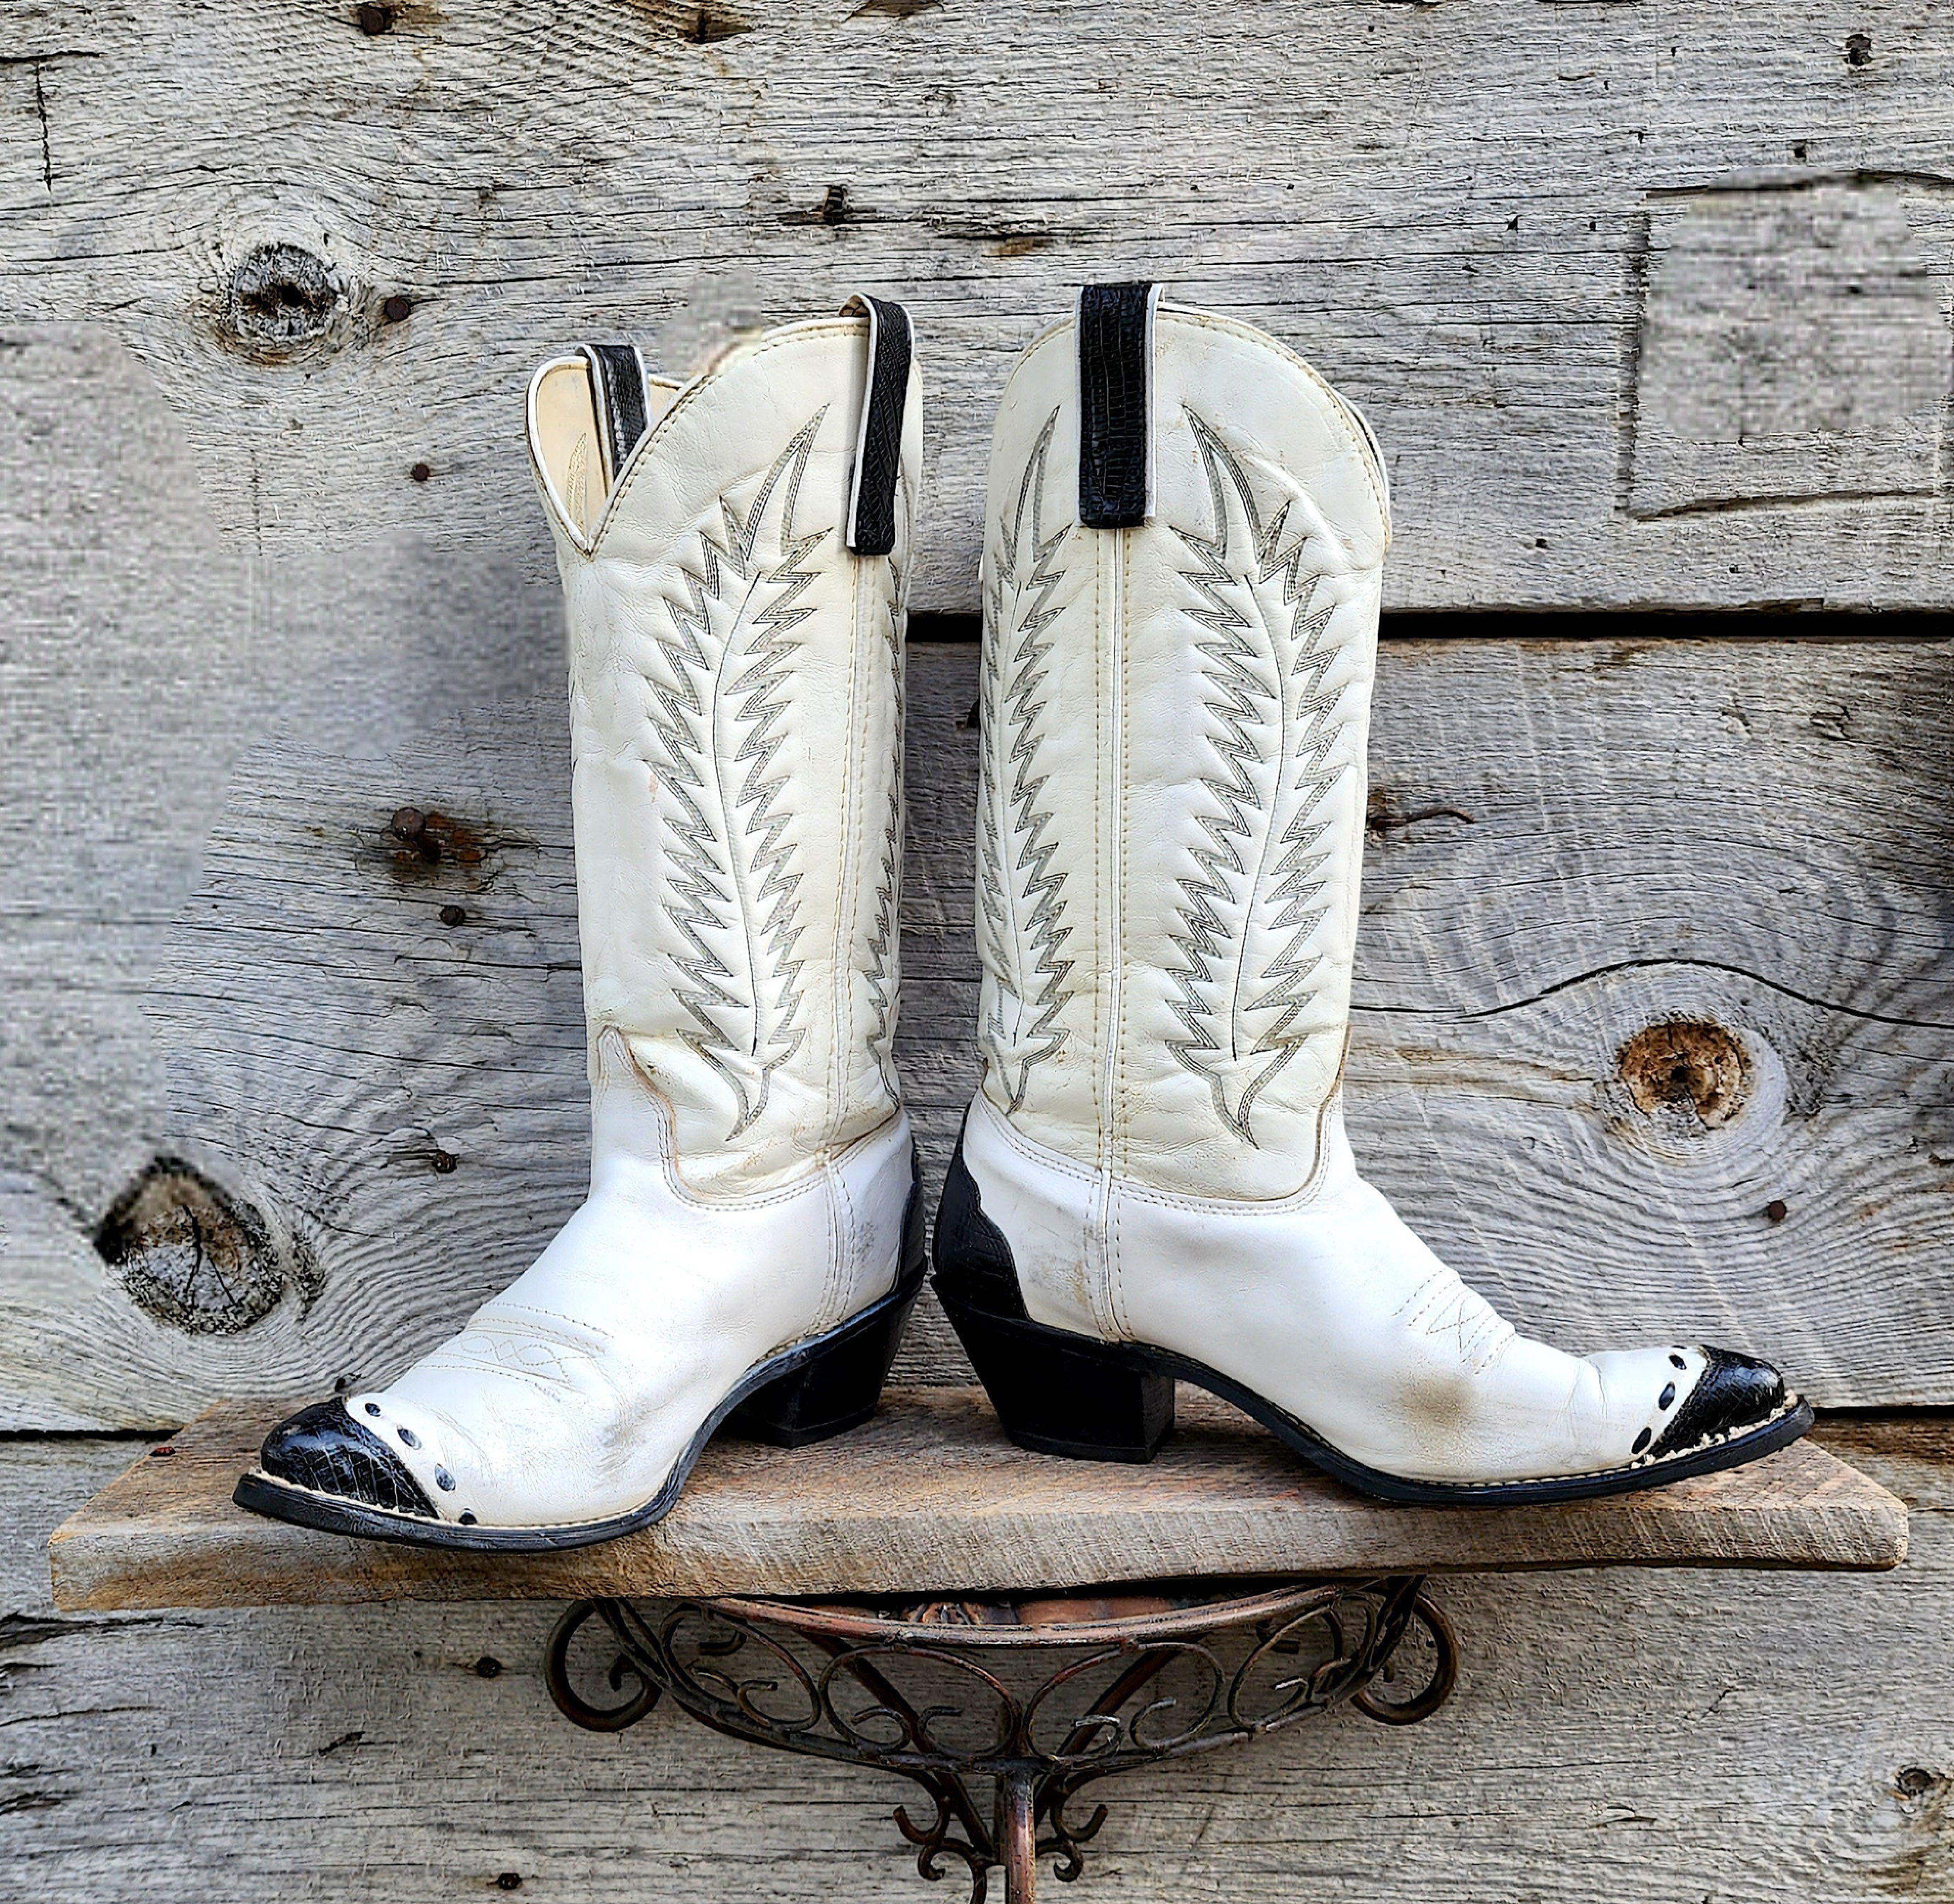 Vintage Woman's Texas Boot Company Cowboy Boots White Leather Western Boots  W/faux Black Lizard Tips & Heels, Buckskin Stitching 8 1/2 M 